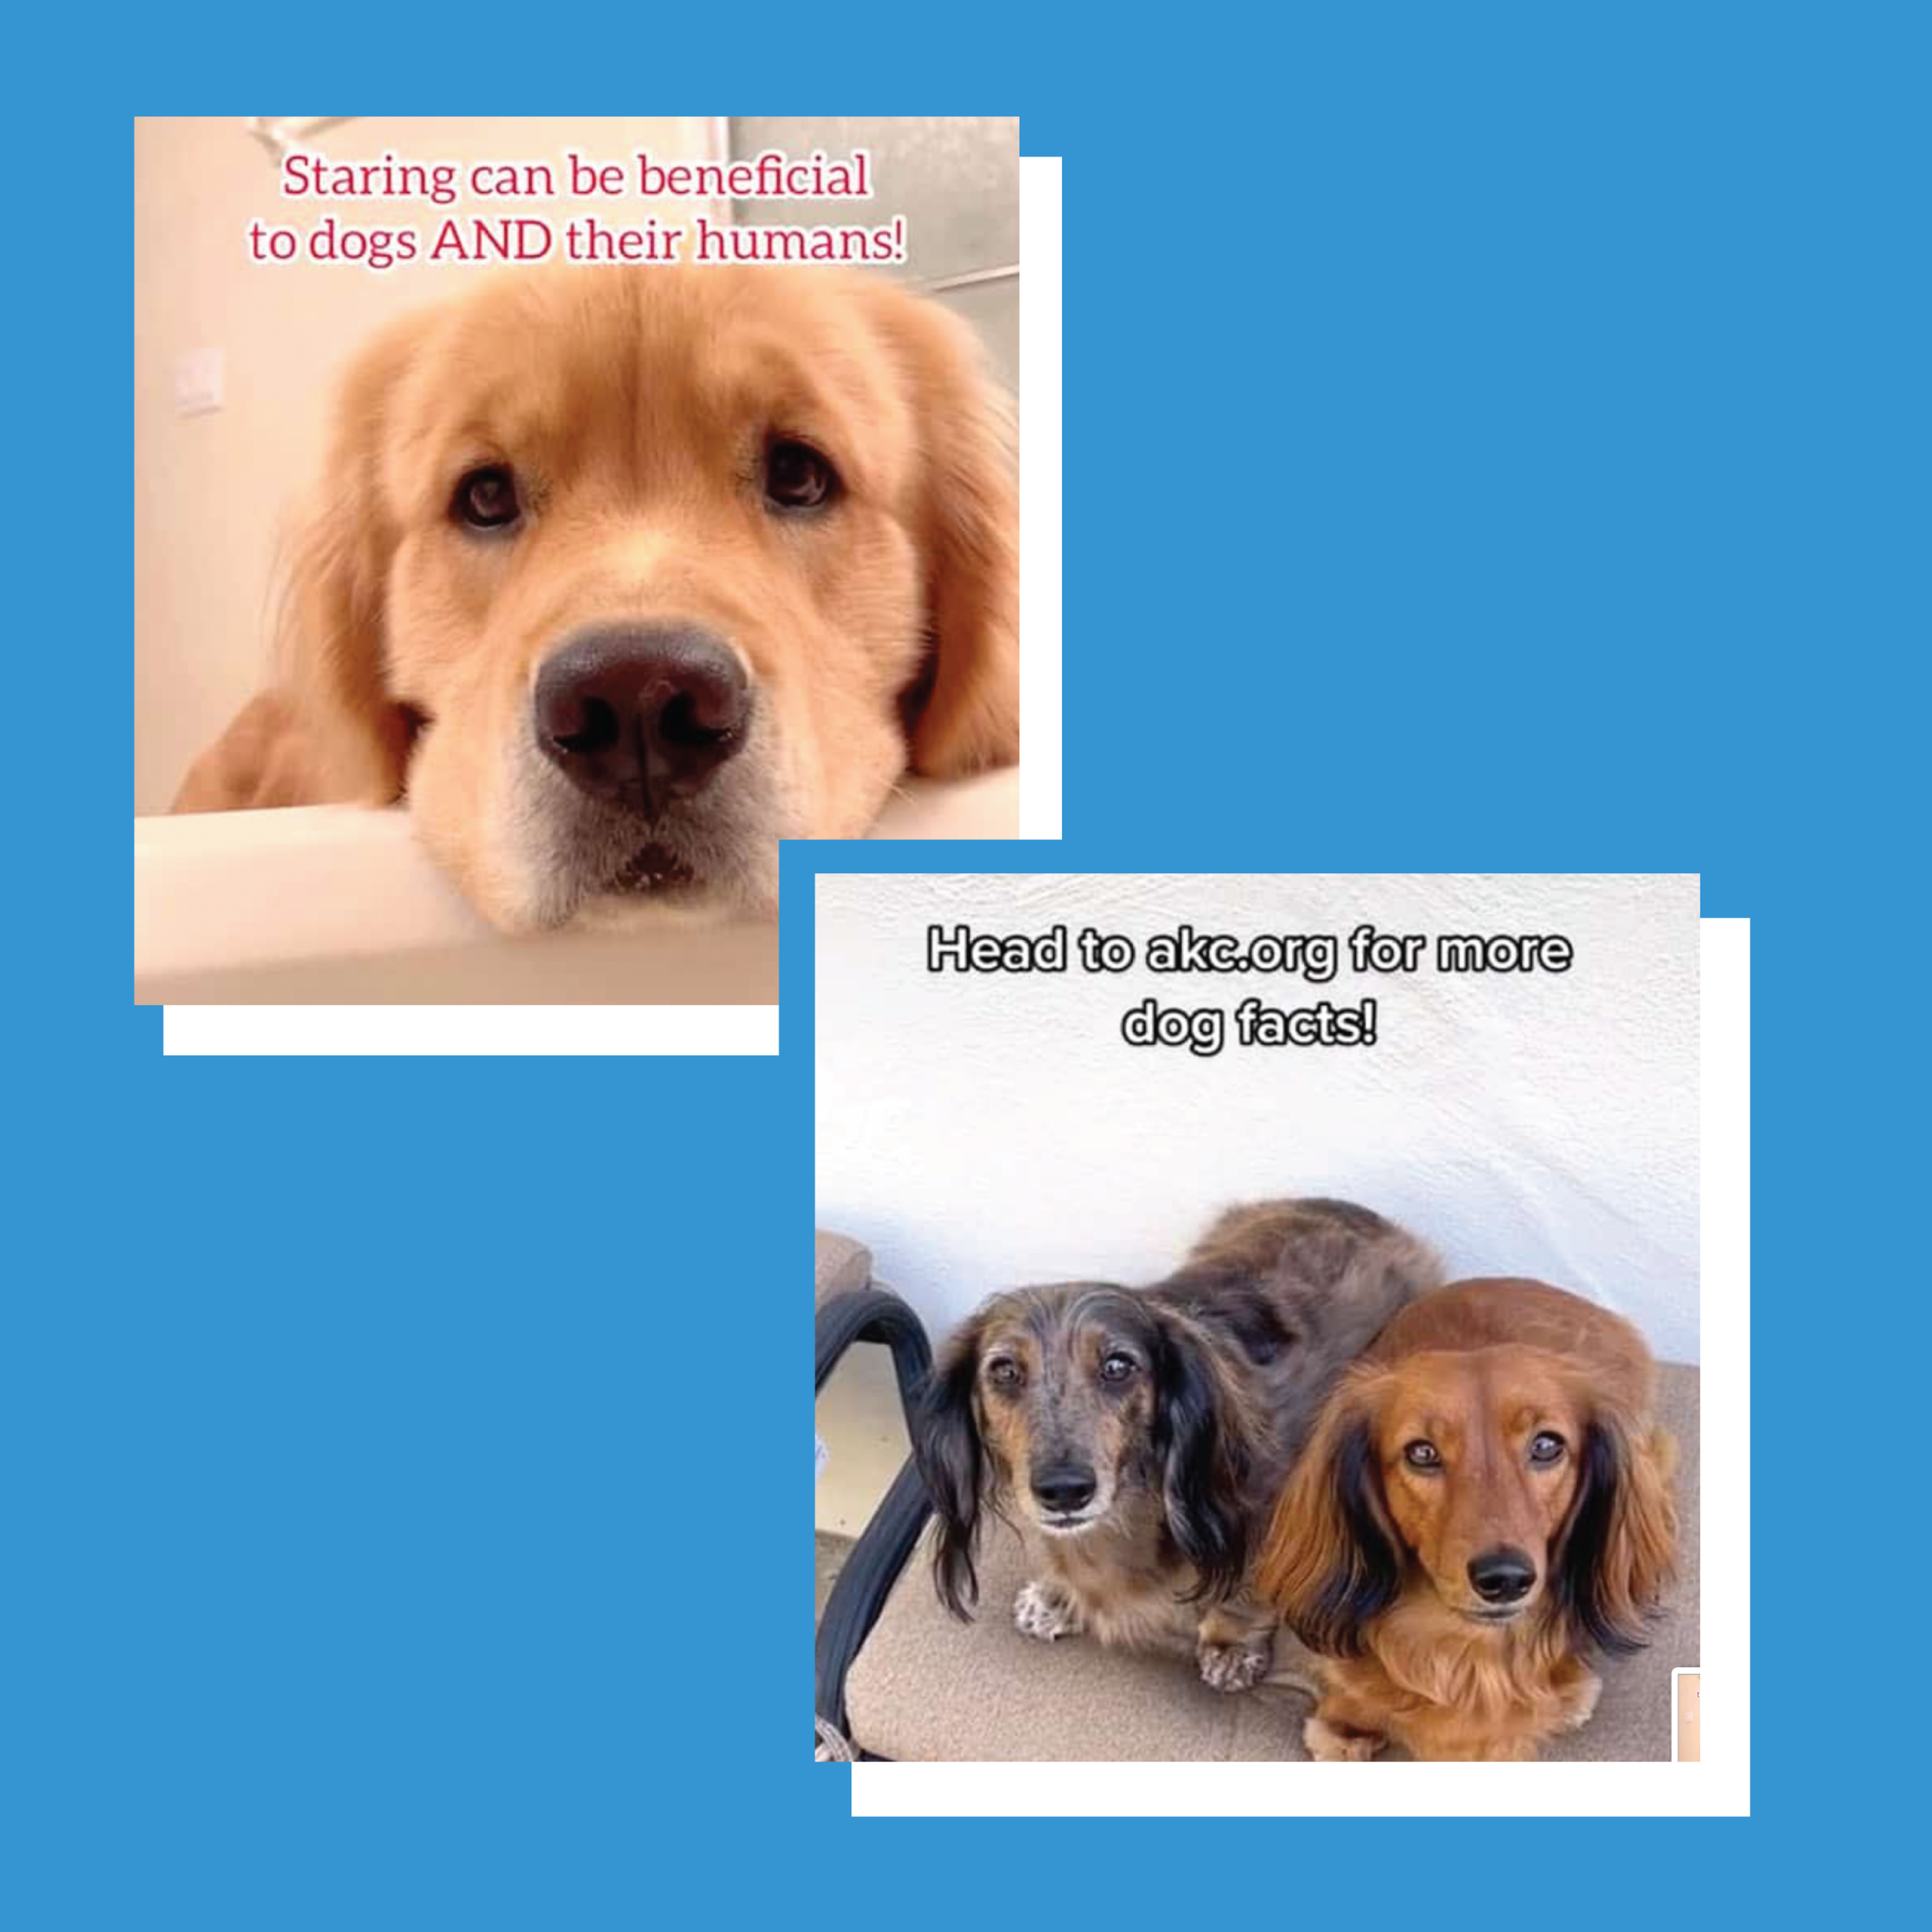 TikTok screenshots of dogs from AKC. First image shows a golden retriever with the copy "Staring can be beneficial to dogs AND their humans!" Second image shows weiner dogs with the caption "Head to akc.org for more facts"